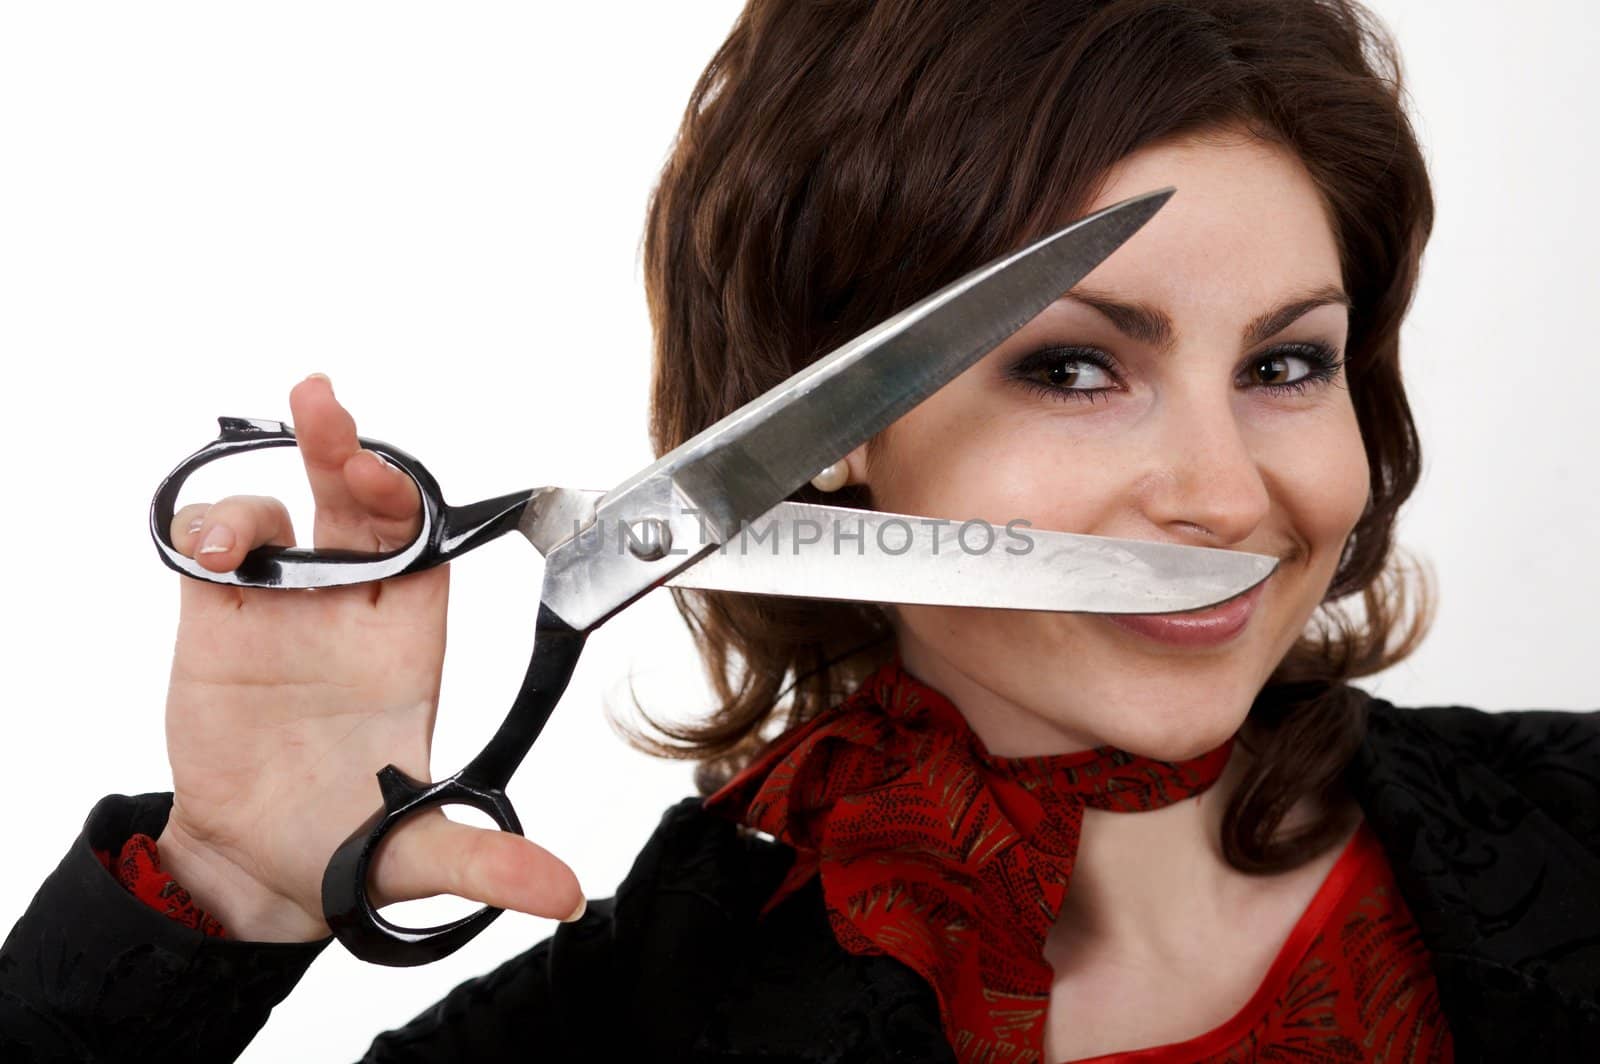 A image of nice woman with scissors